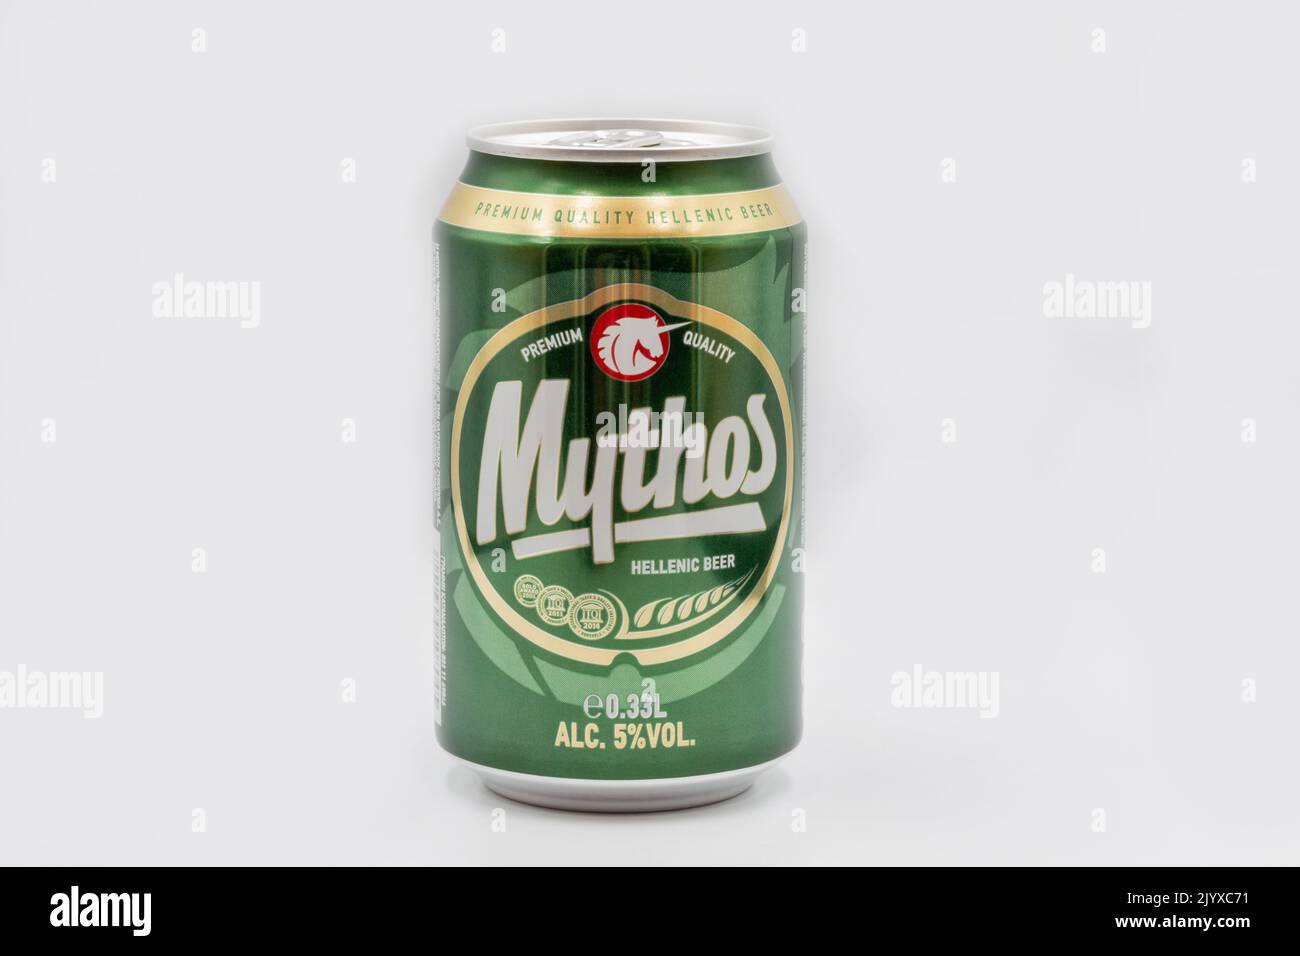 Corfu, Greece - August 05, 2021: Studio shoot of Mythos beer can closeup on white. Mythos is a Greek beer brand created in 1997 and since 2015 produce Stock Photo